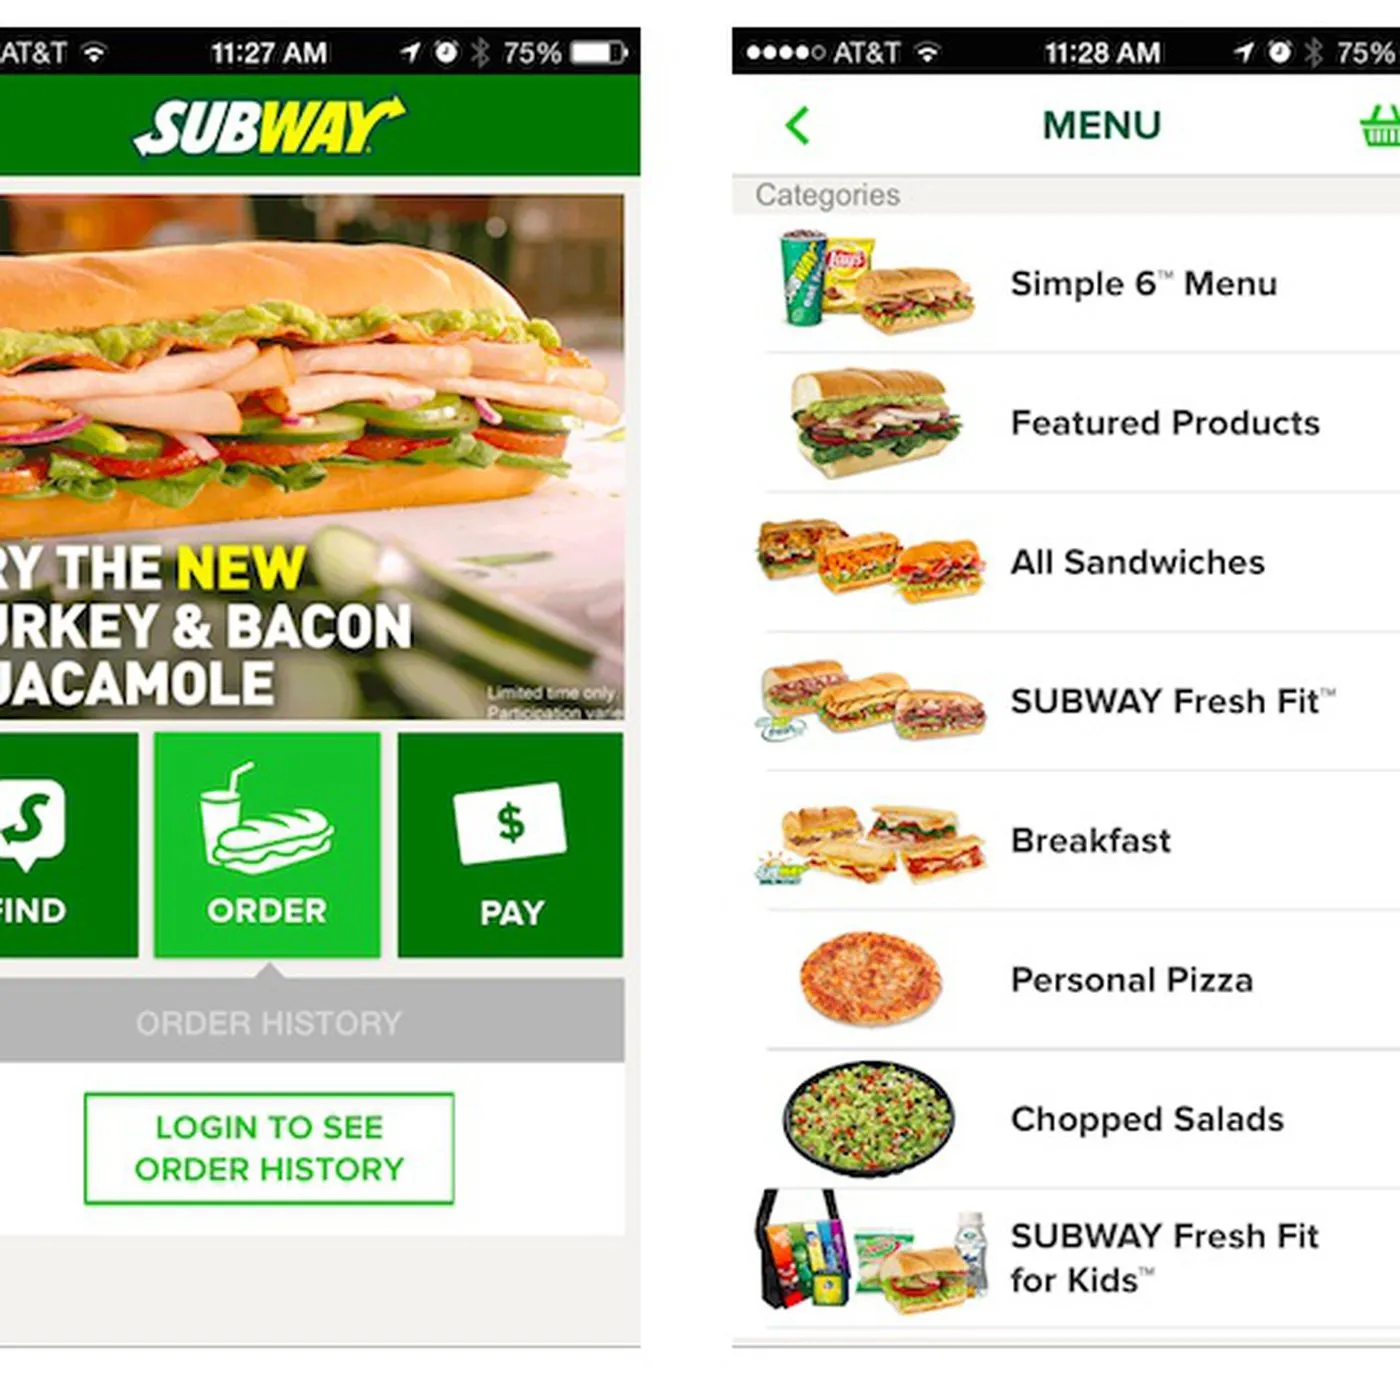 Does Subway Website Accept Apple Pay?